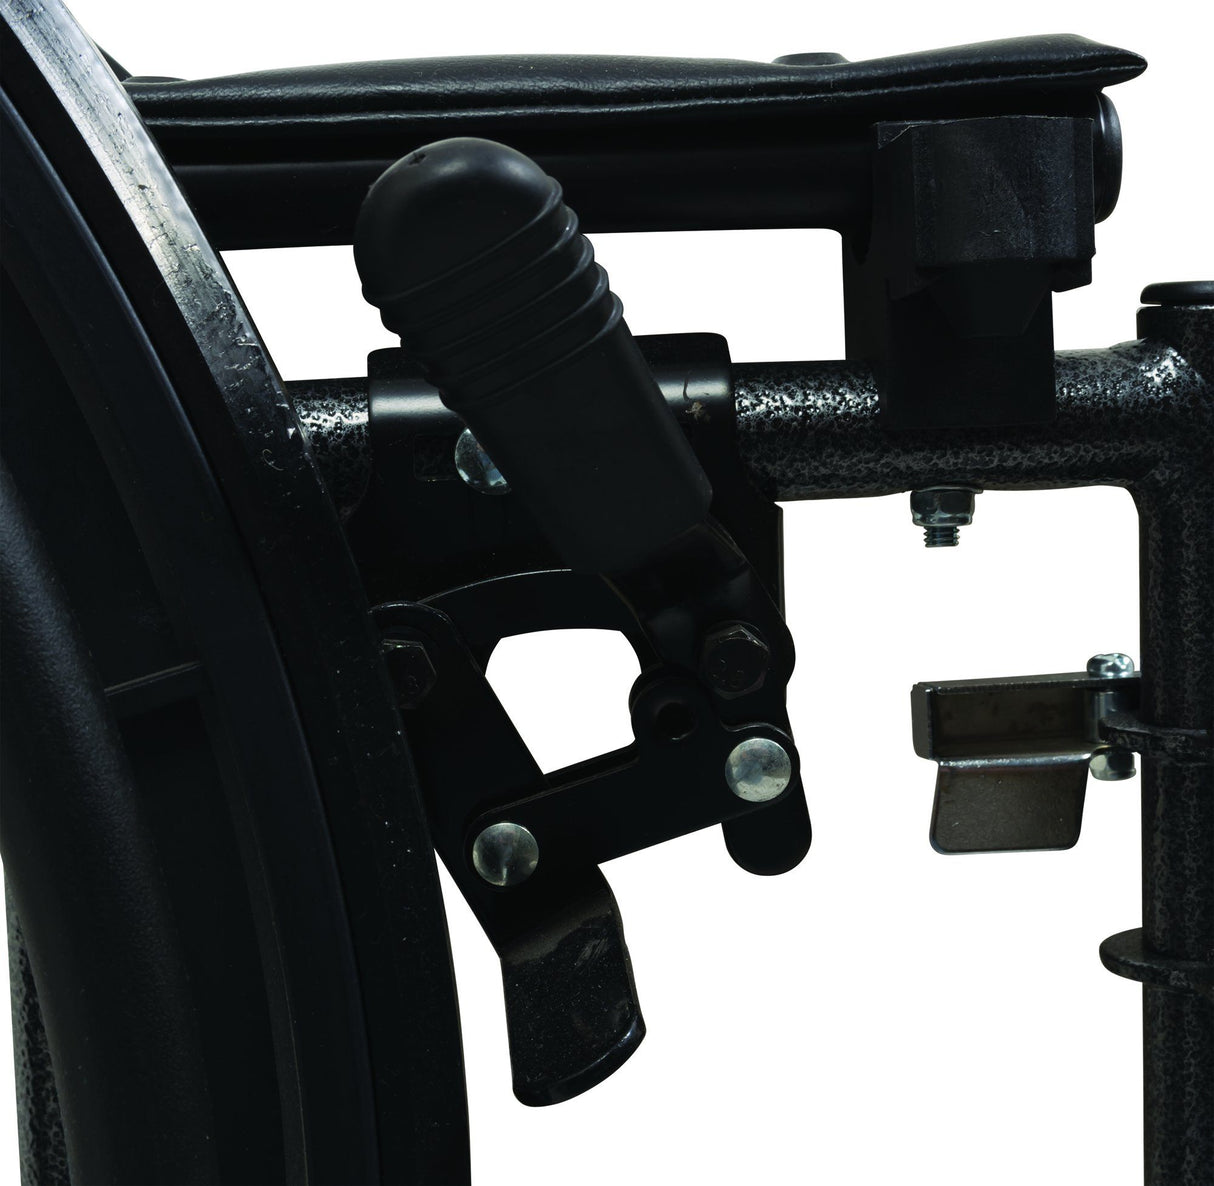 Image of ProBasics K3 Lightweight Wheelchair with 20" x 16" Seat, Flip-Up Height Adj. Desk Arms, Swing-Away Footrests